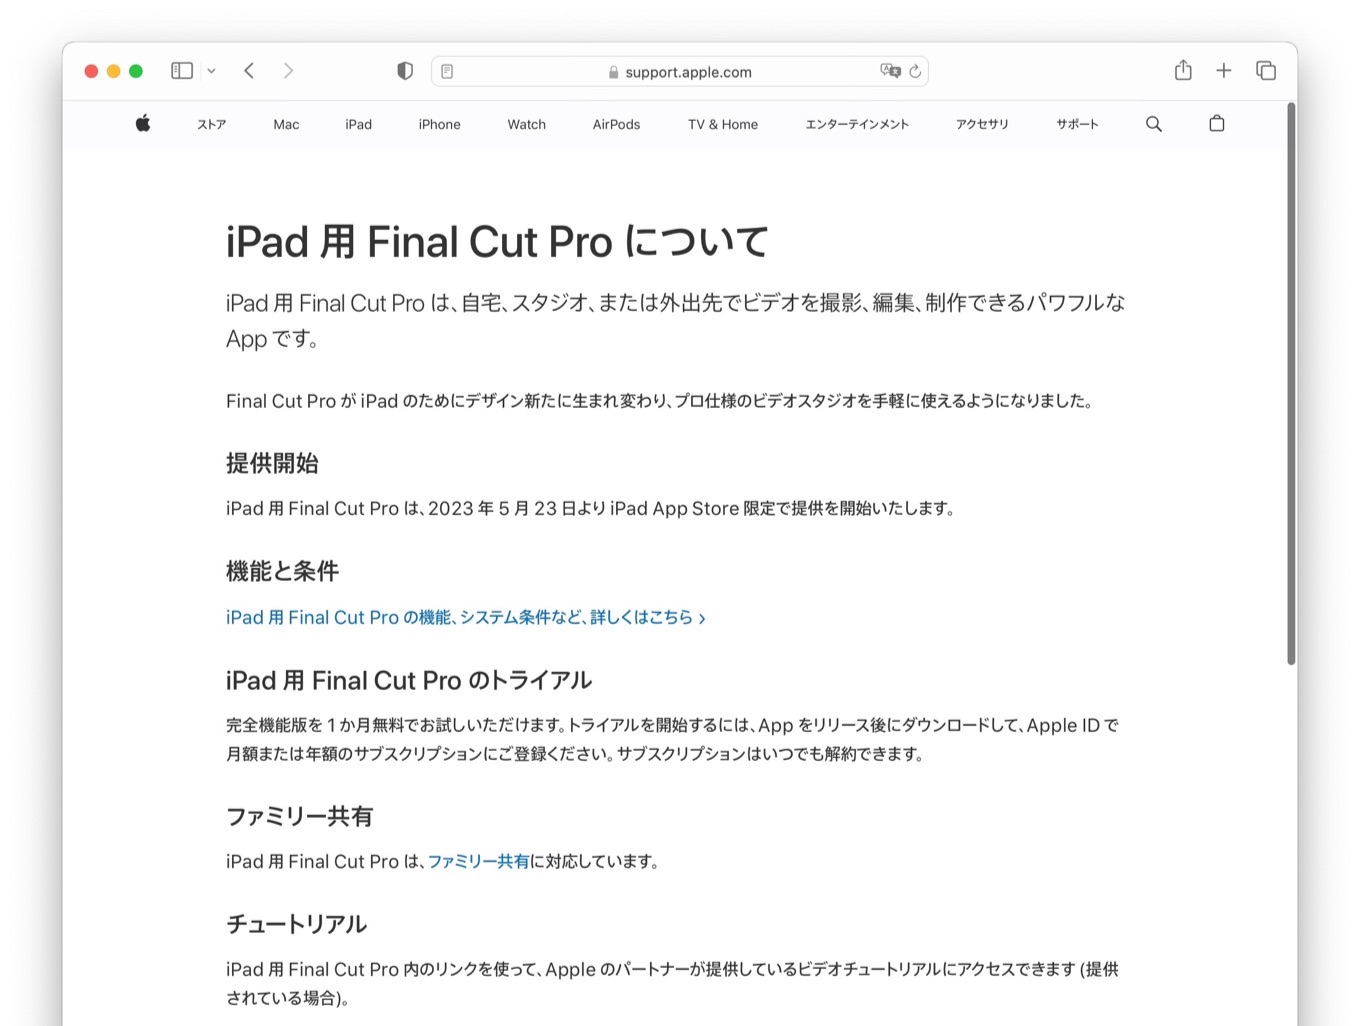 About Final Cut Pro for iPad